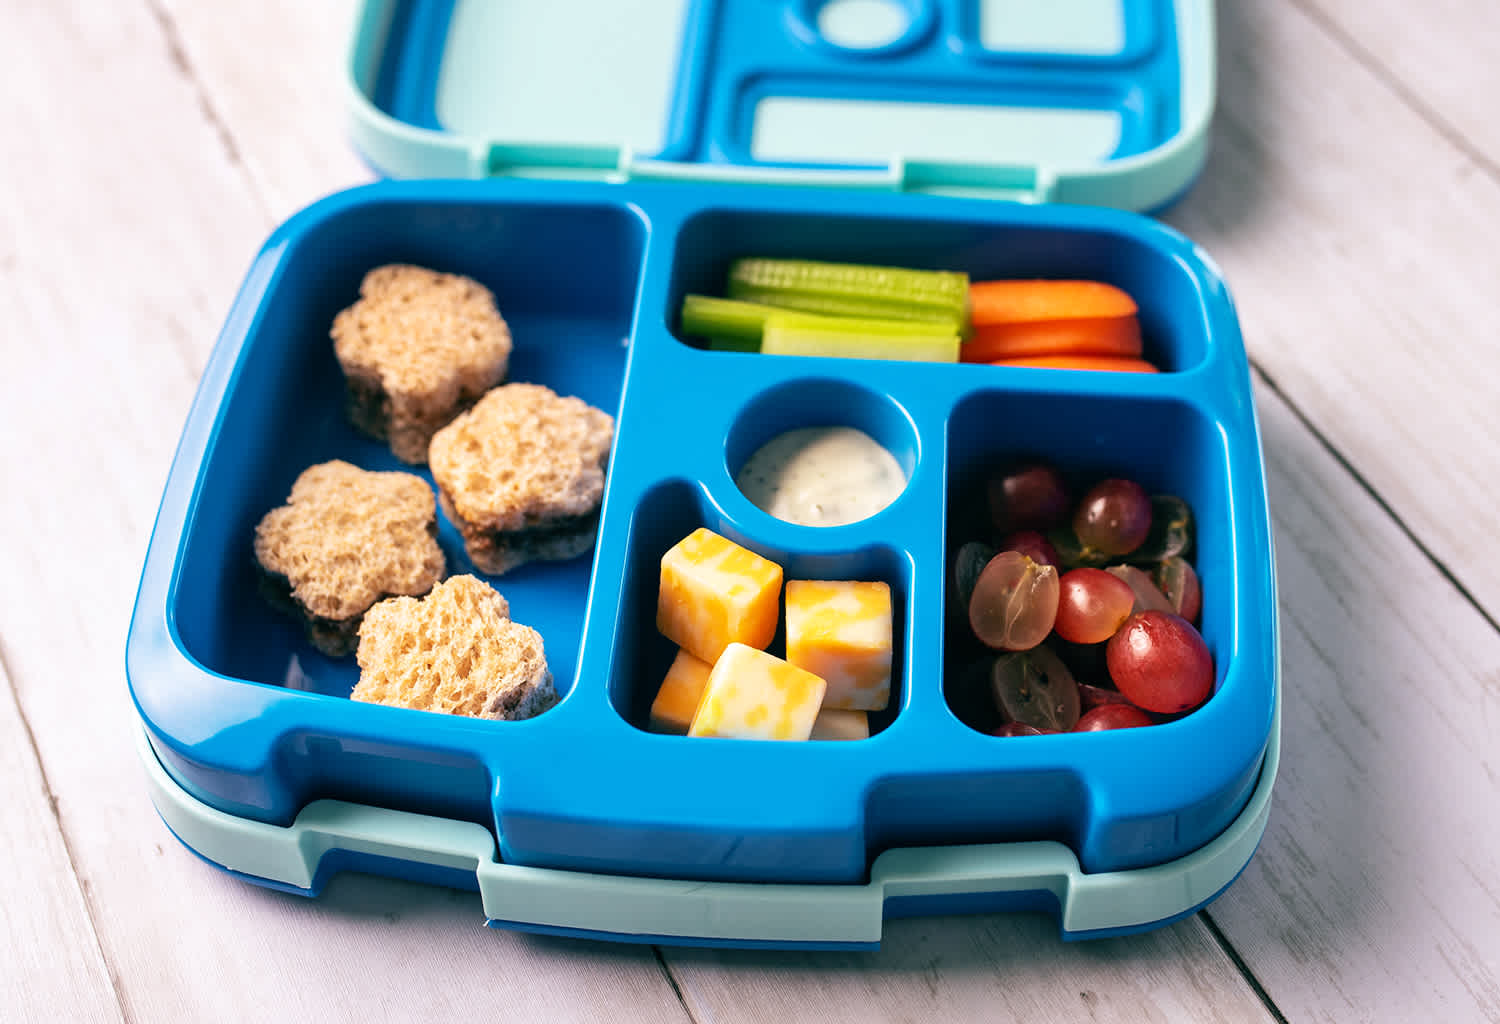 Take A Dip 2 the Side Lunch Container - 3 PACK Food Storage Snack